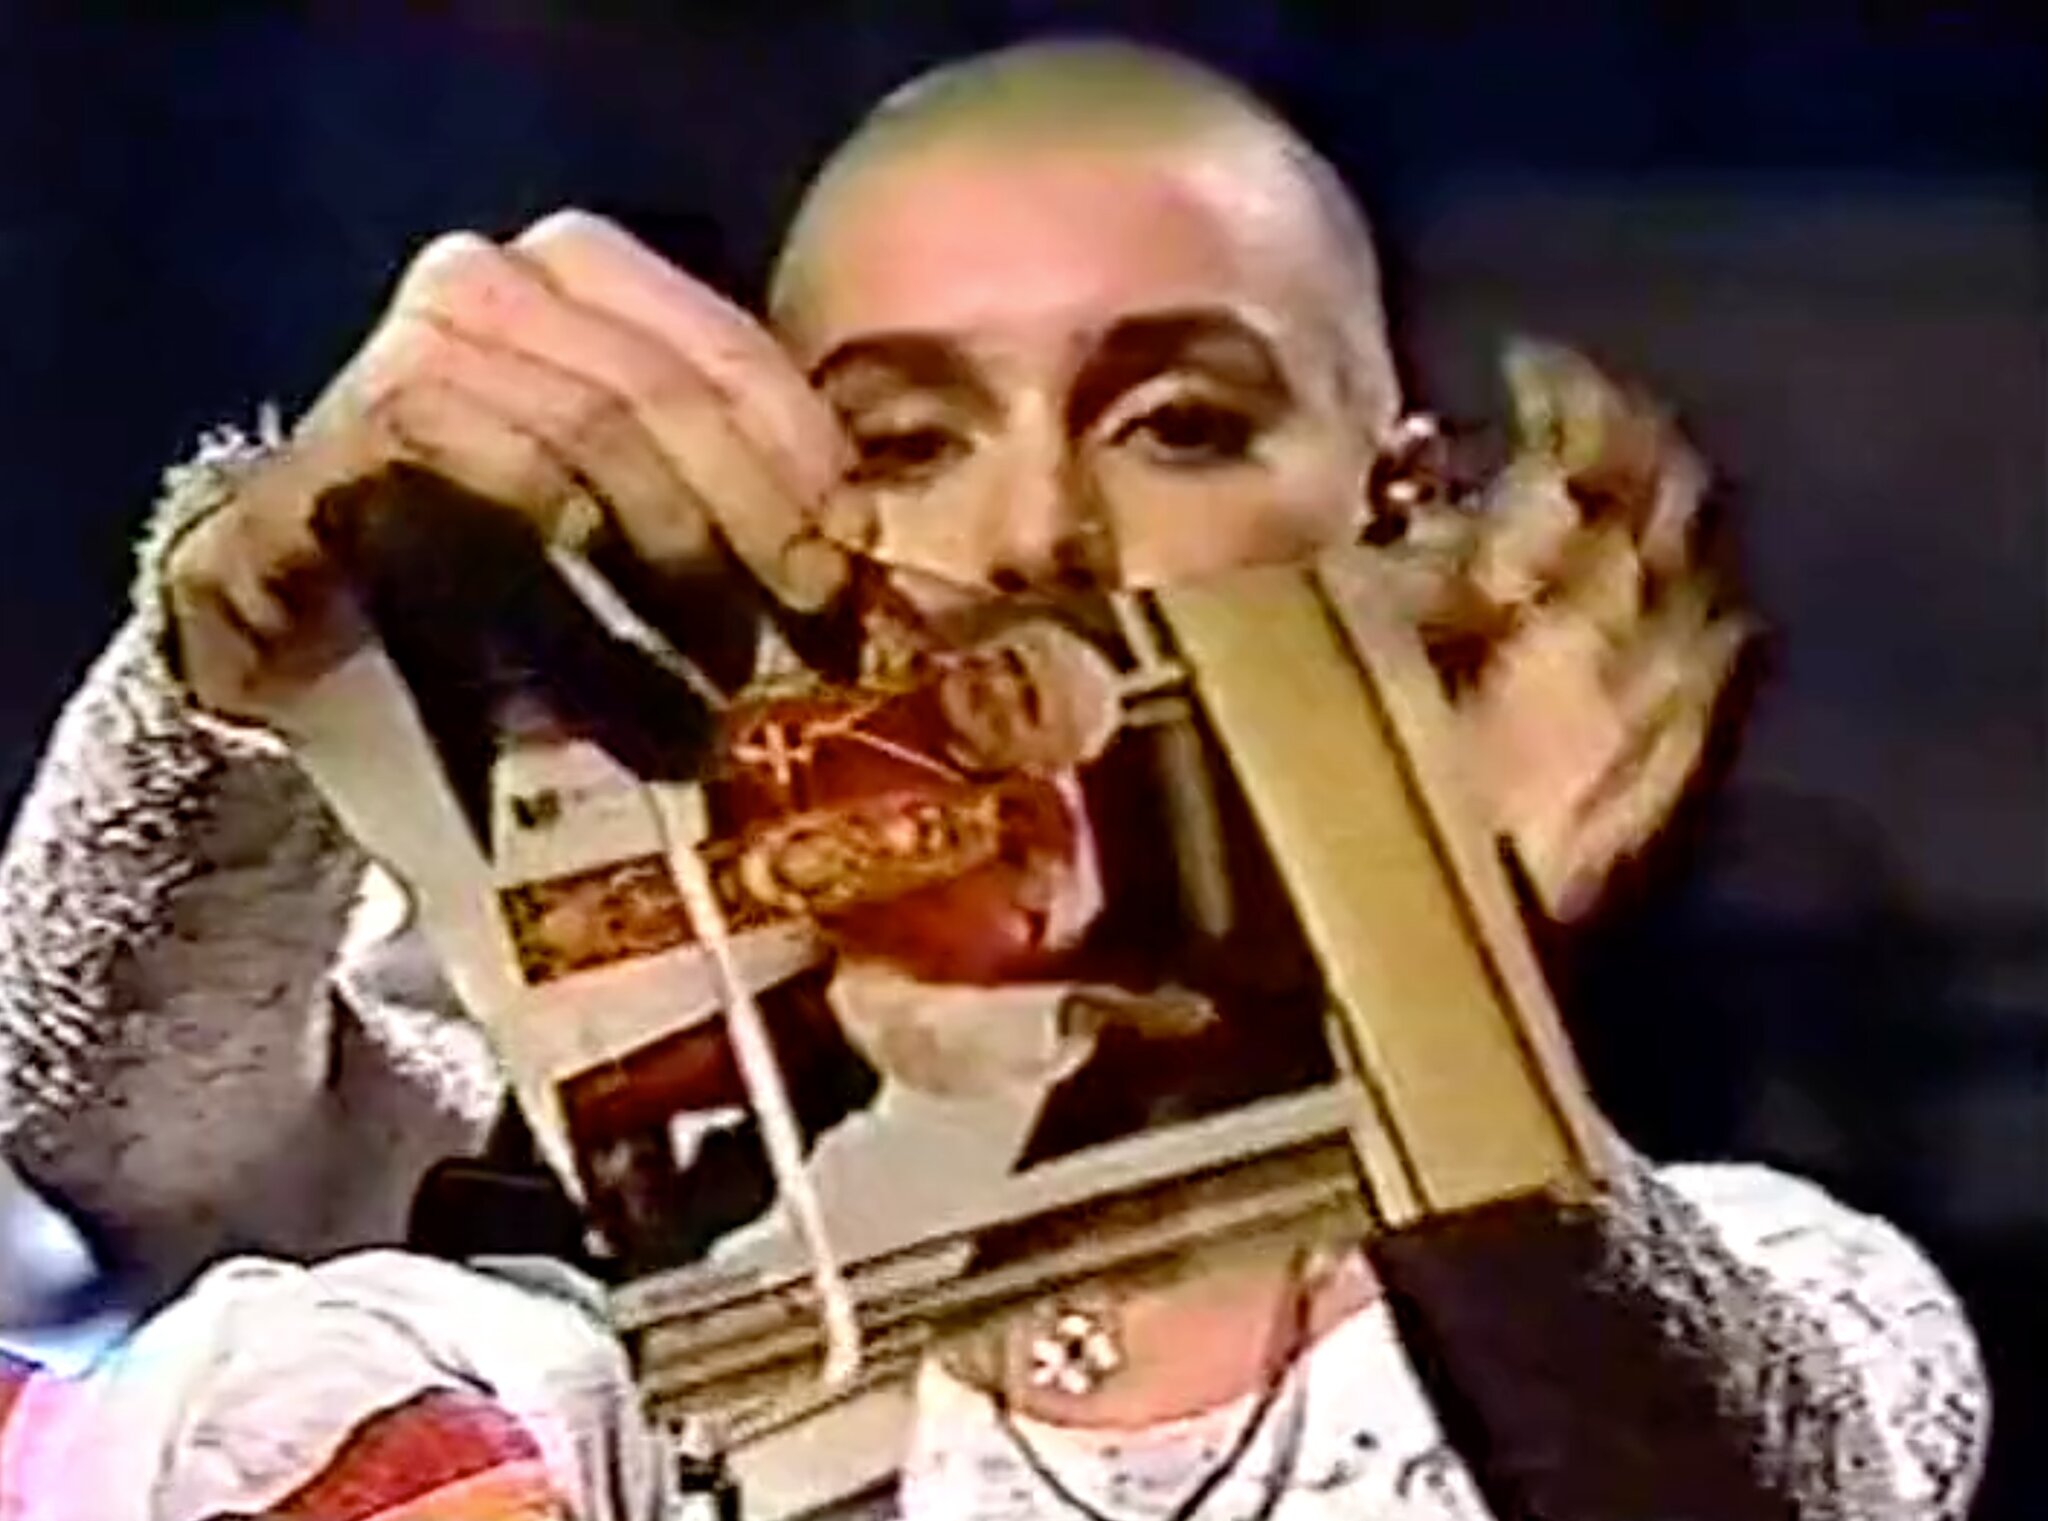 Sinead O'Connor ripping the photo of the Pope